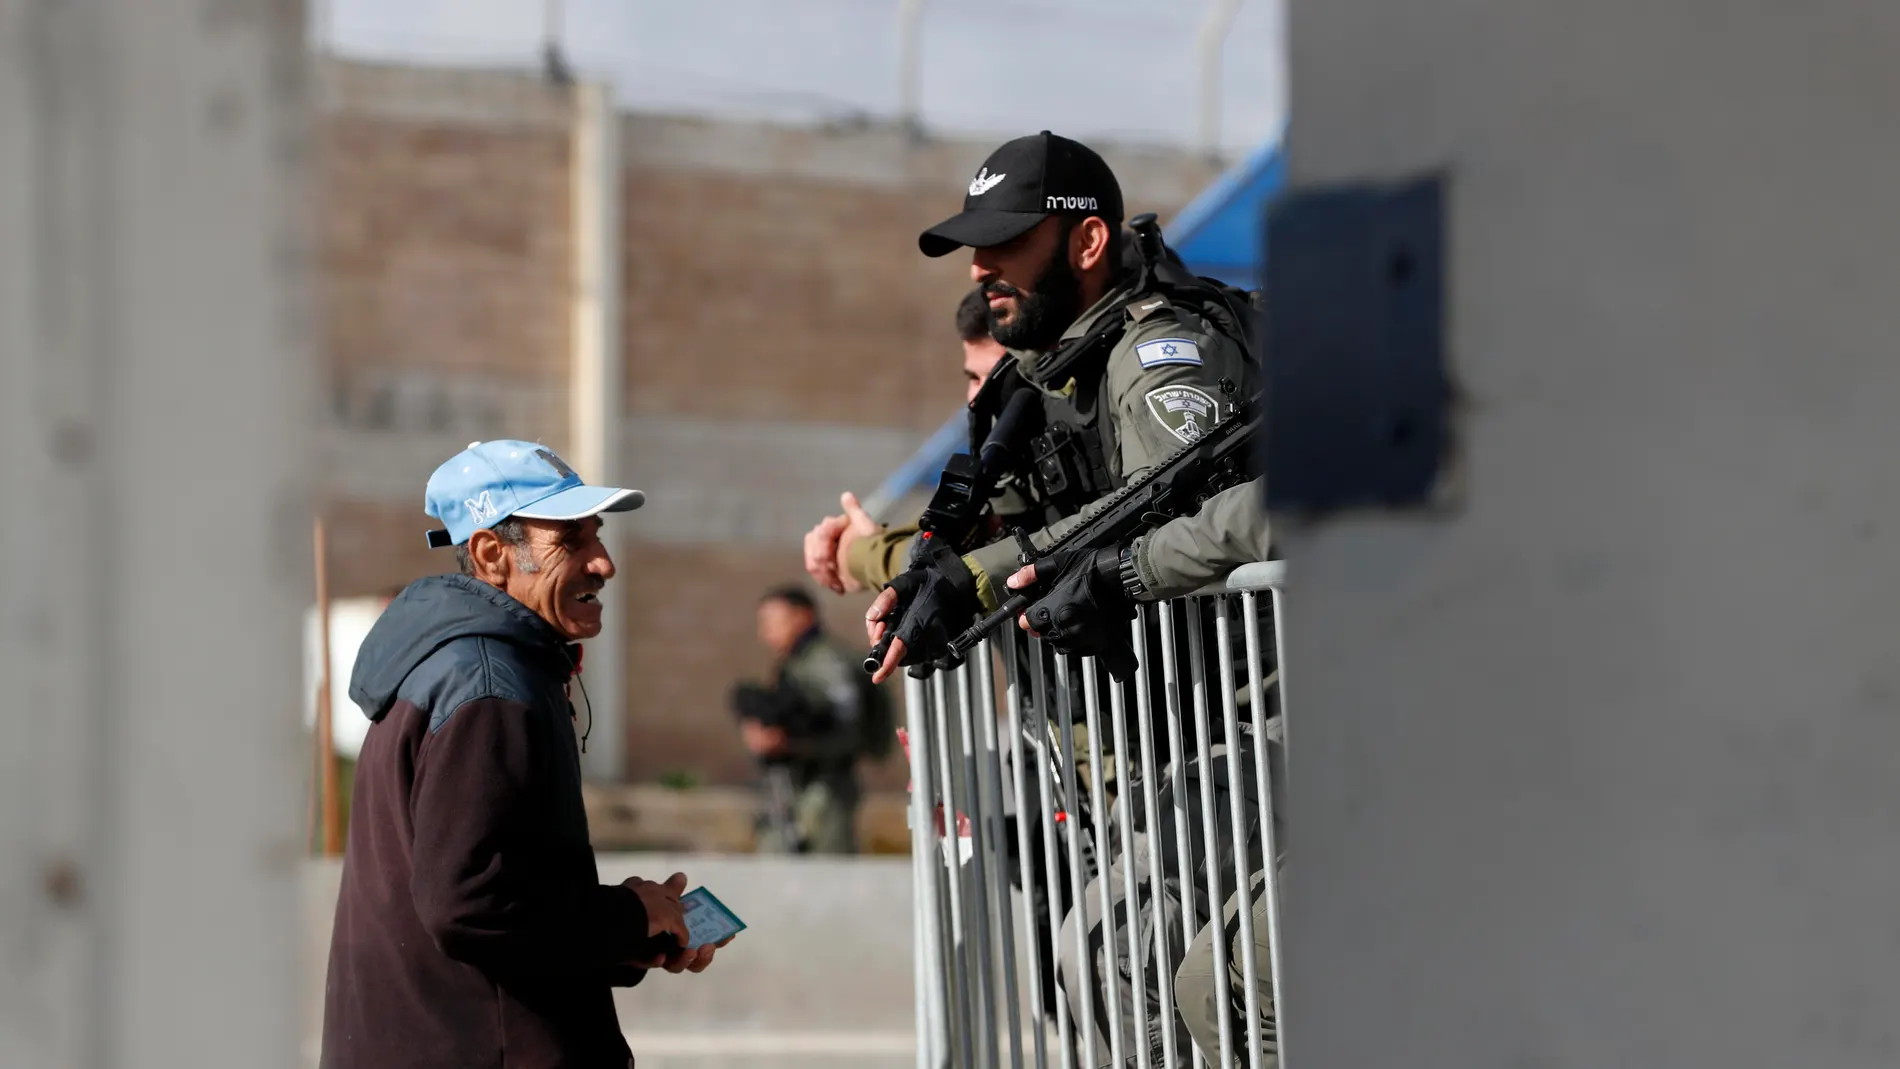 Qalandia Checkpoint (-), 15/03/2024.- A Palestinian man reacts next to Israeli officials at the Israeli checkpoint of Qalandia, between the West Bank and Jerusalem, 15 March 2024, as they make their way to Jerusalem's al-Aqsa compound to attend Friday prayers during the Muslim holy fasting month of Ramadan. A limited number of West Bank Palestinians with permits are allowed to attend Friday prayers at Al-Aqsa Mosque, restricted to children under 10, men over 55, and women over 50. (Jerusalén)...